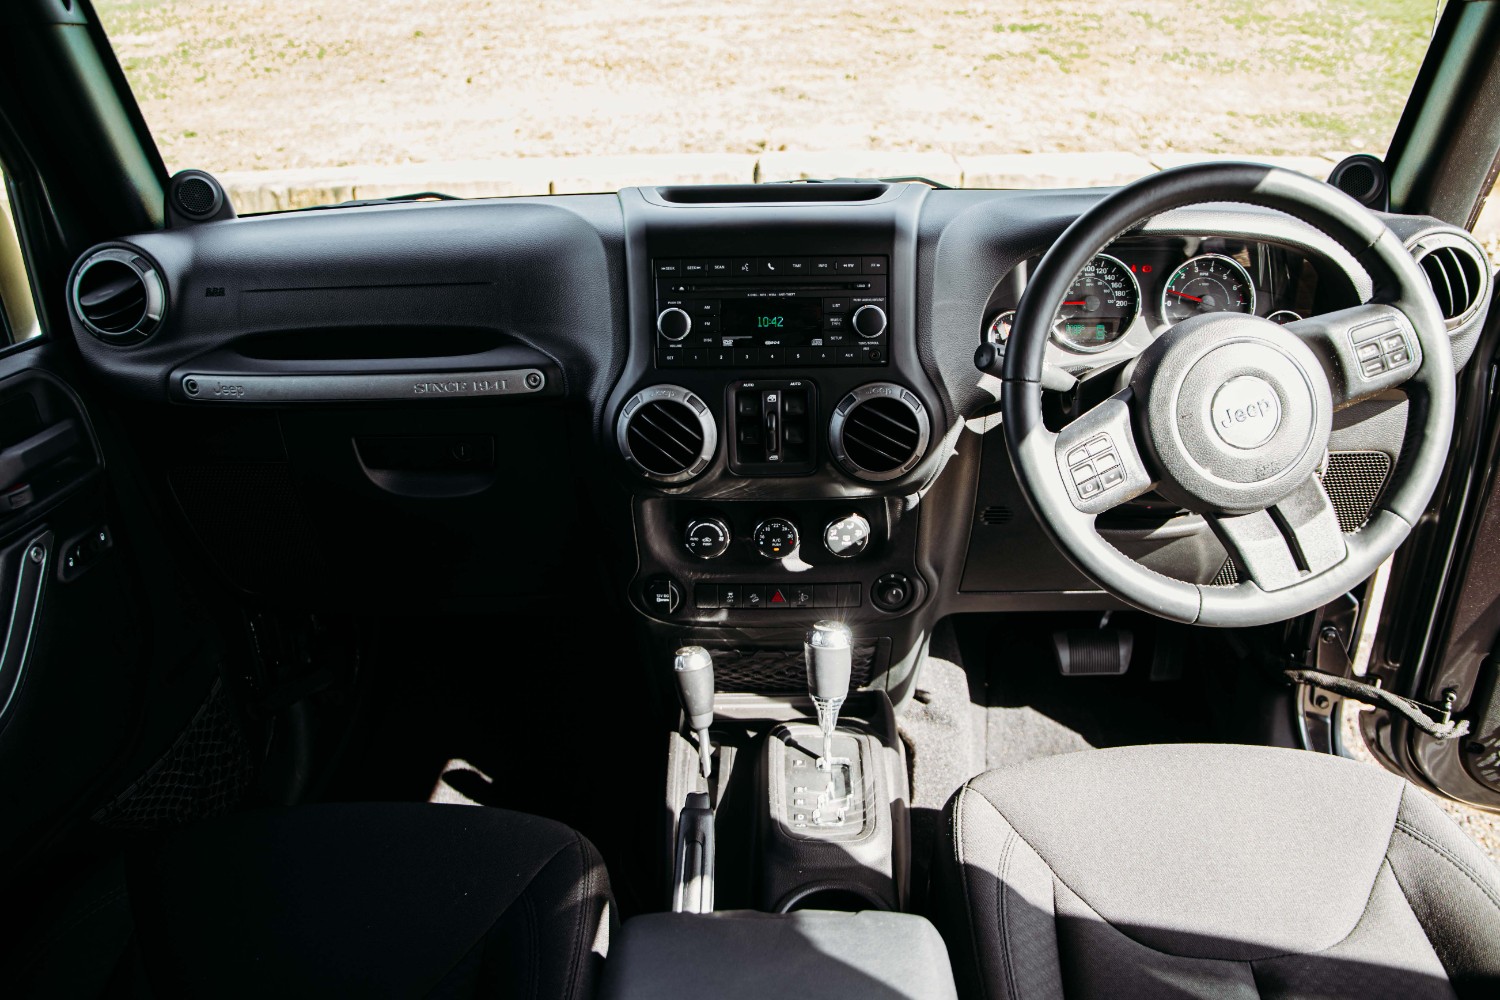 2014 Jeep Wrangler Unlimited - Sport Convertible Image 22